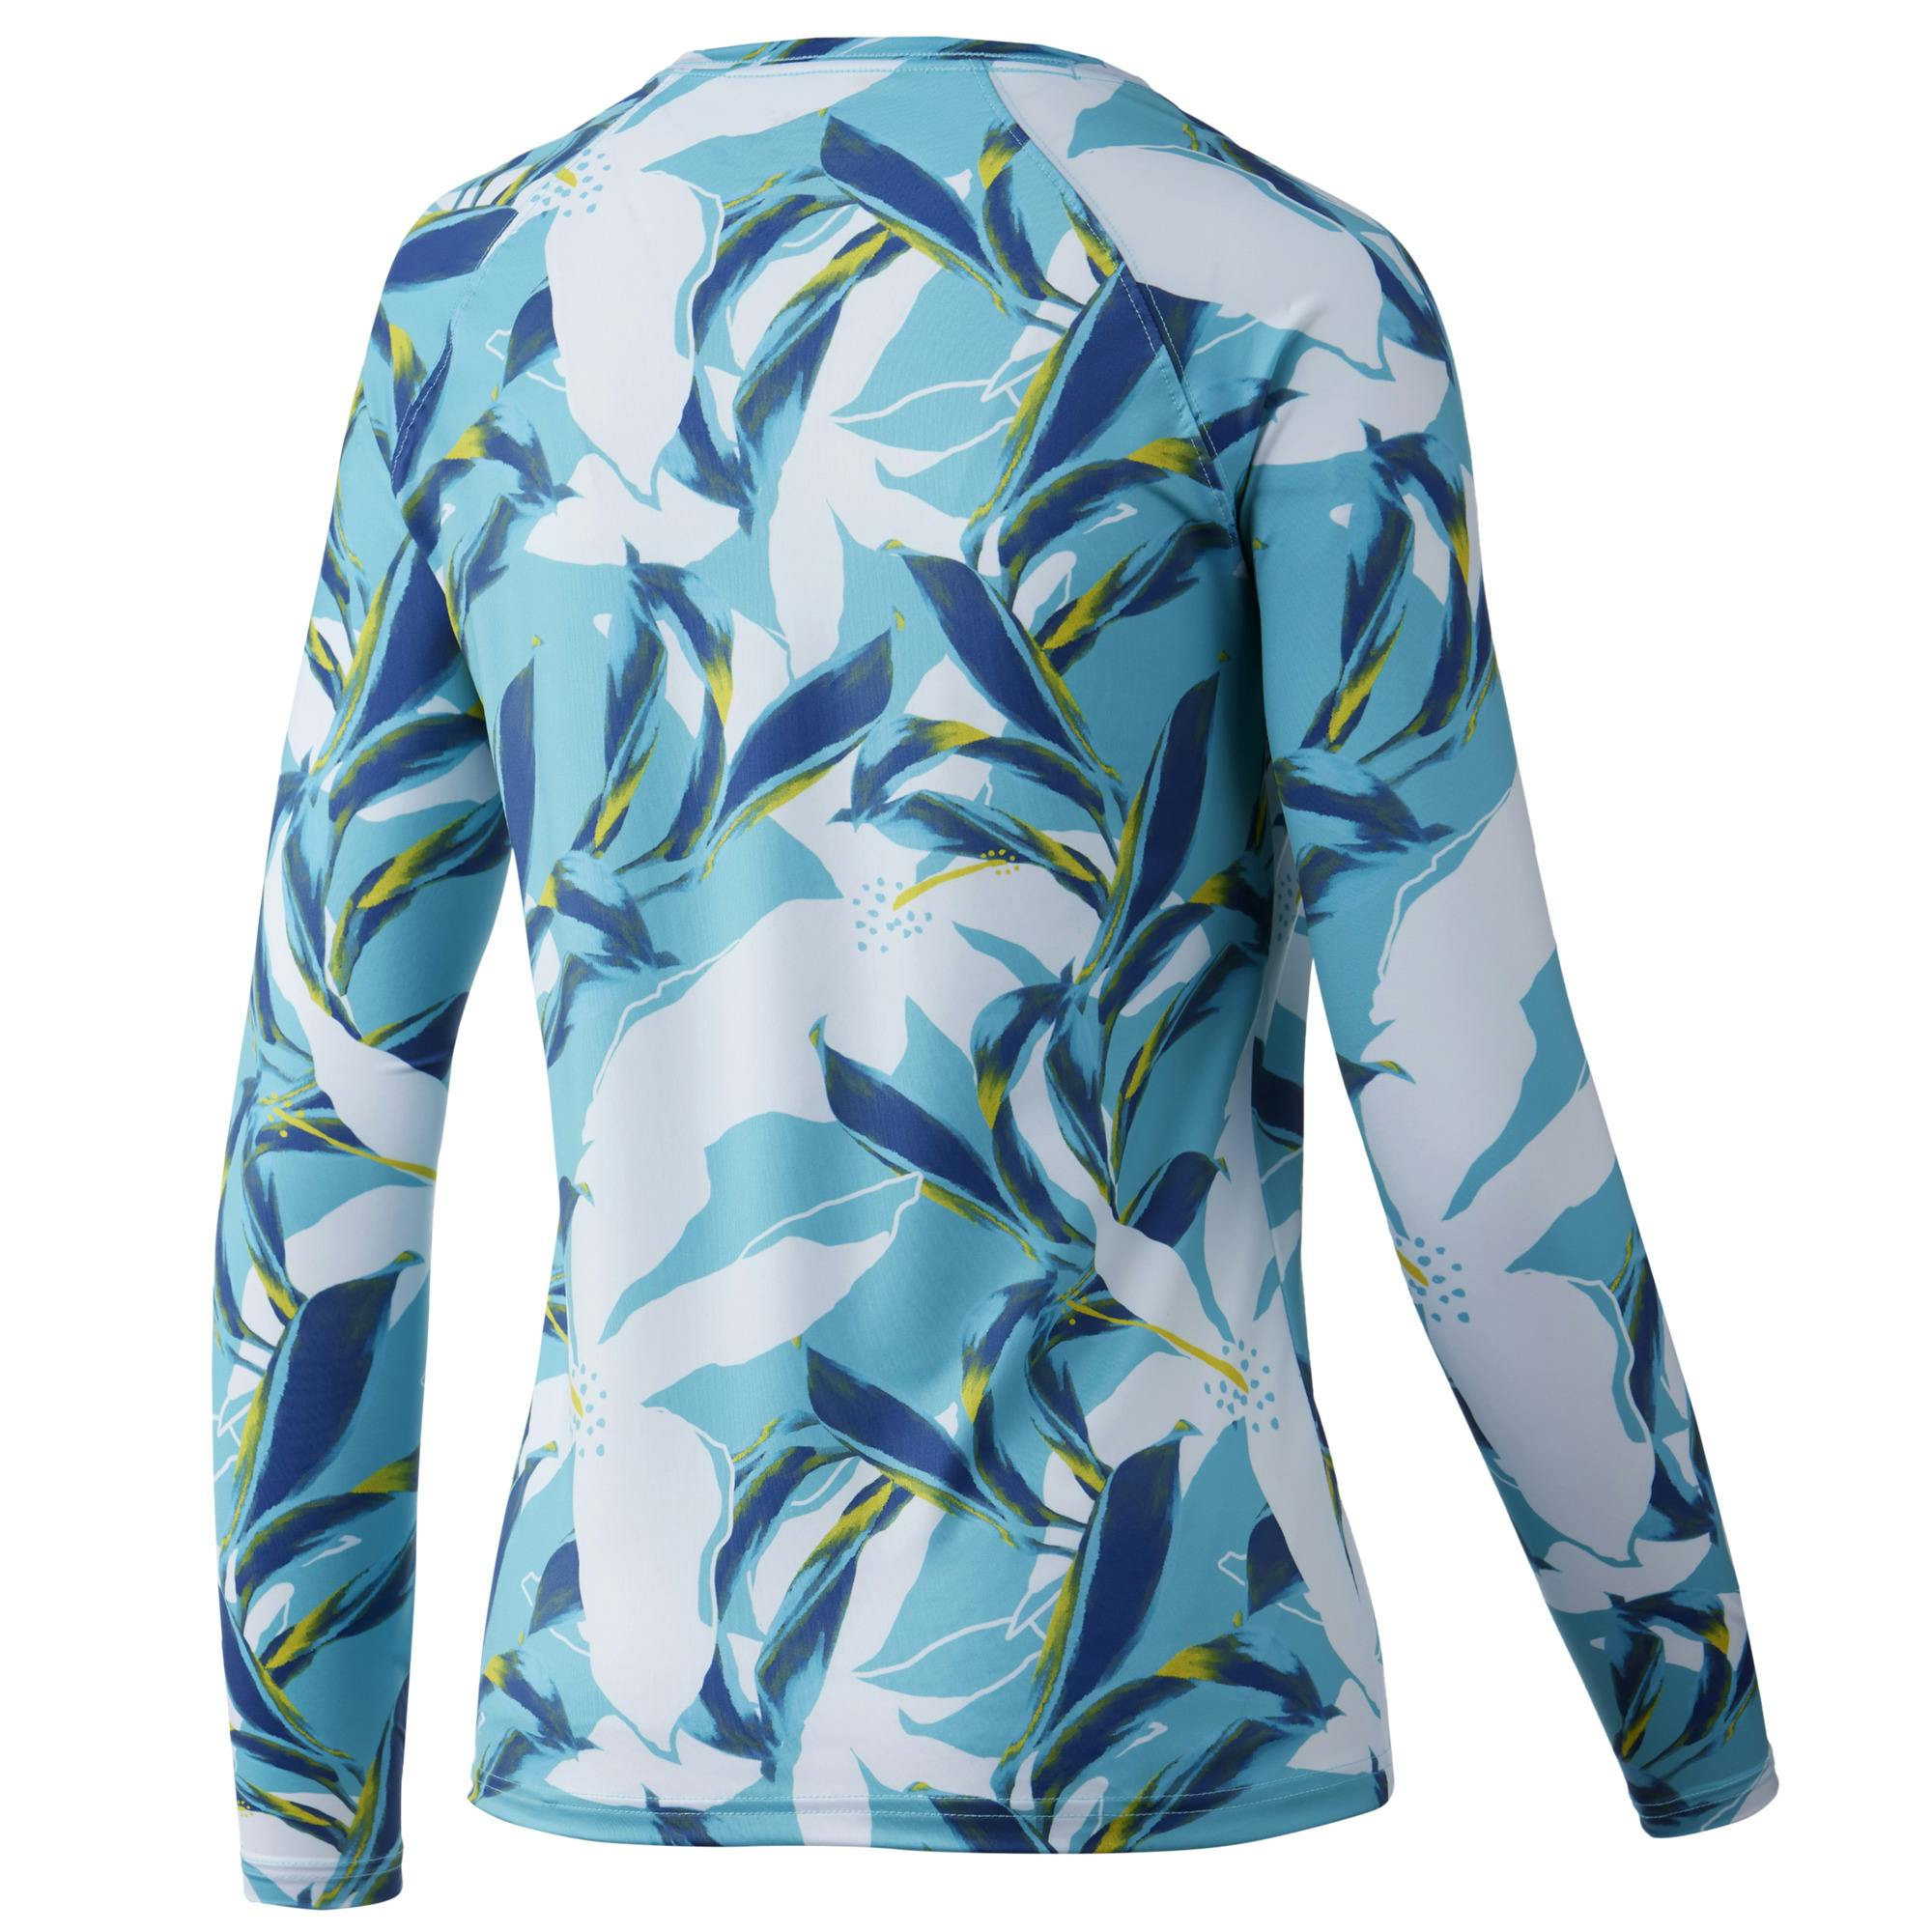 Huk Tall Leaves Pursuit Long Sleeve Performance Shirt (Women's) Front - Blue Radiance